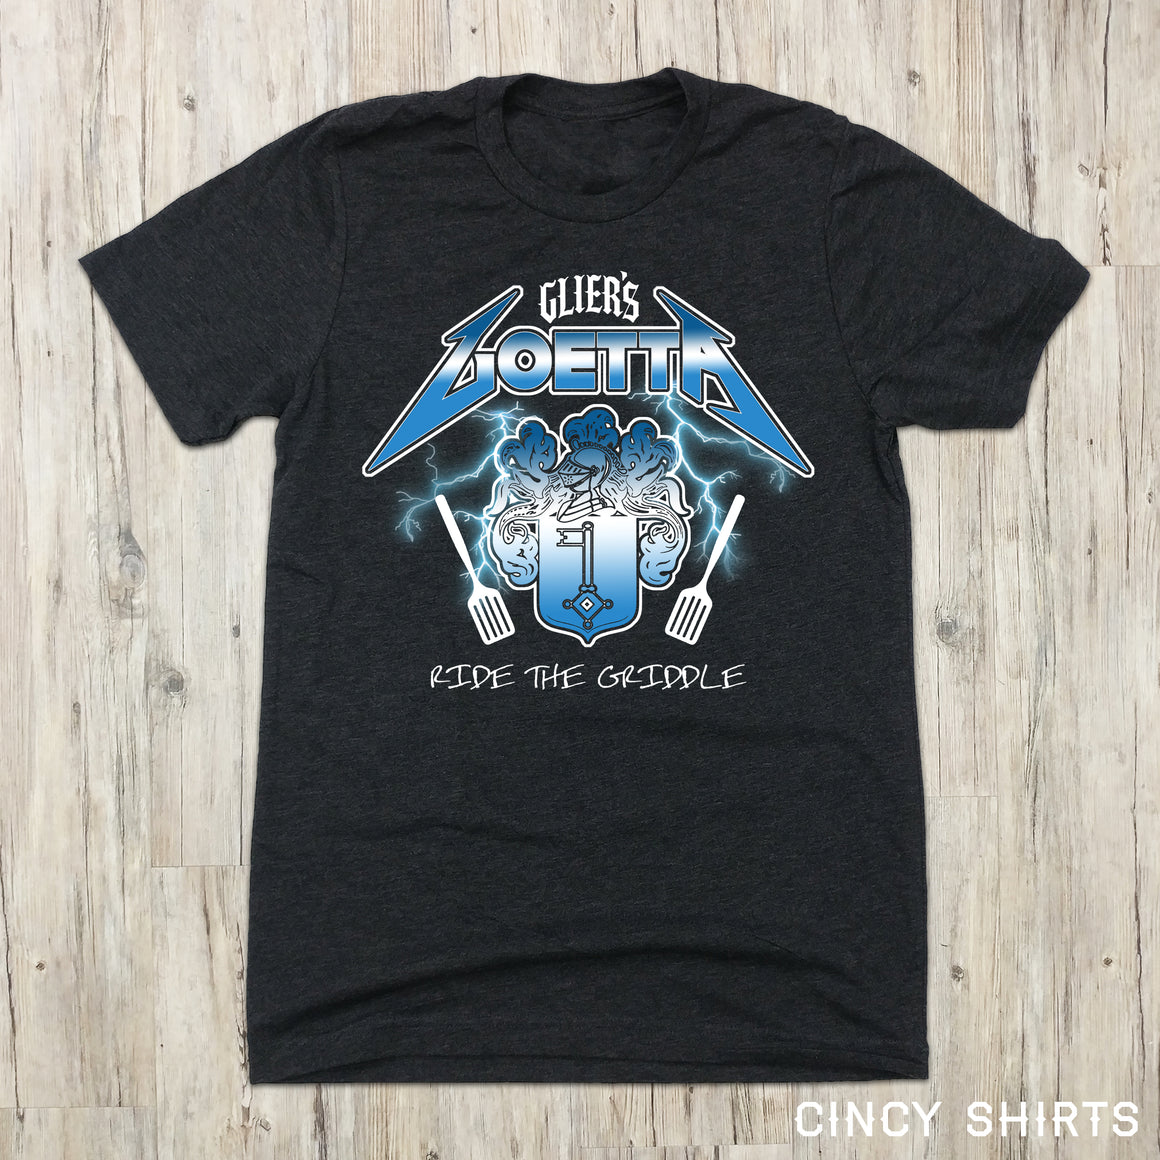 Glier's Goetta - Ride the Griddle - Adult & Youth Sizes - Cincy Shirts